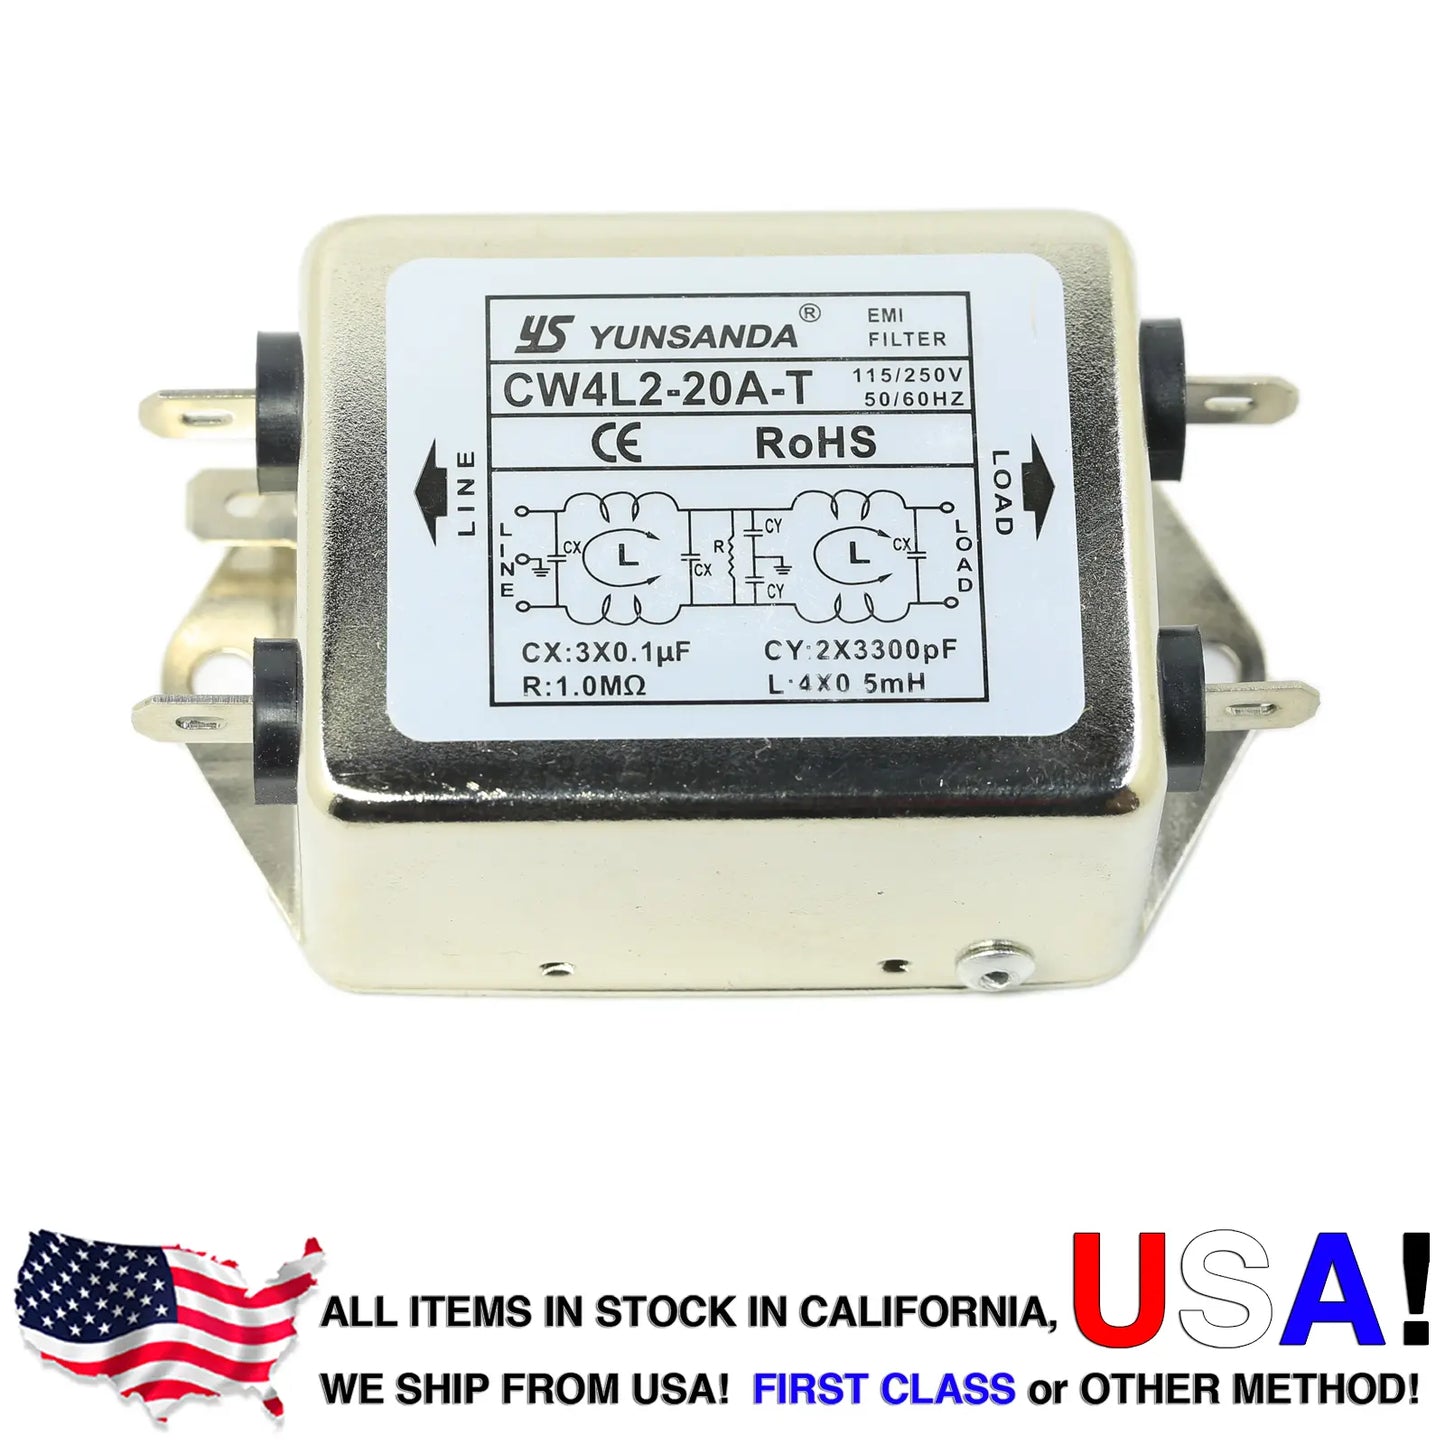 Quick Connect Flange Mount Power Filter CW4L2-20A-T EMI Power Filter